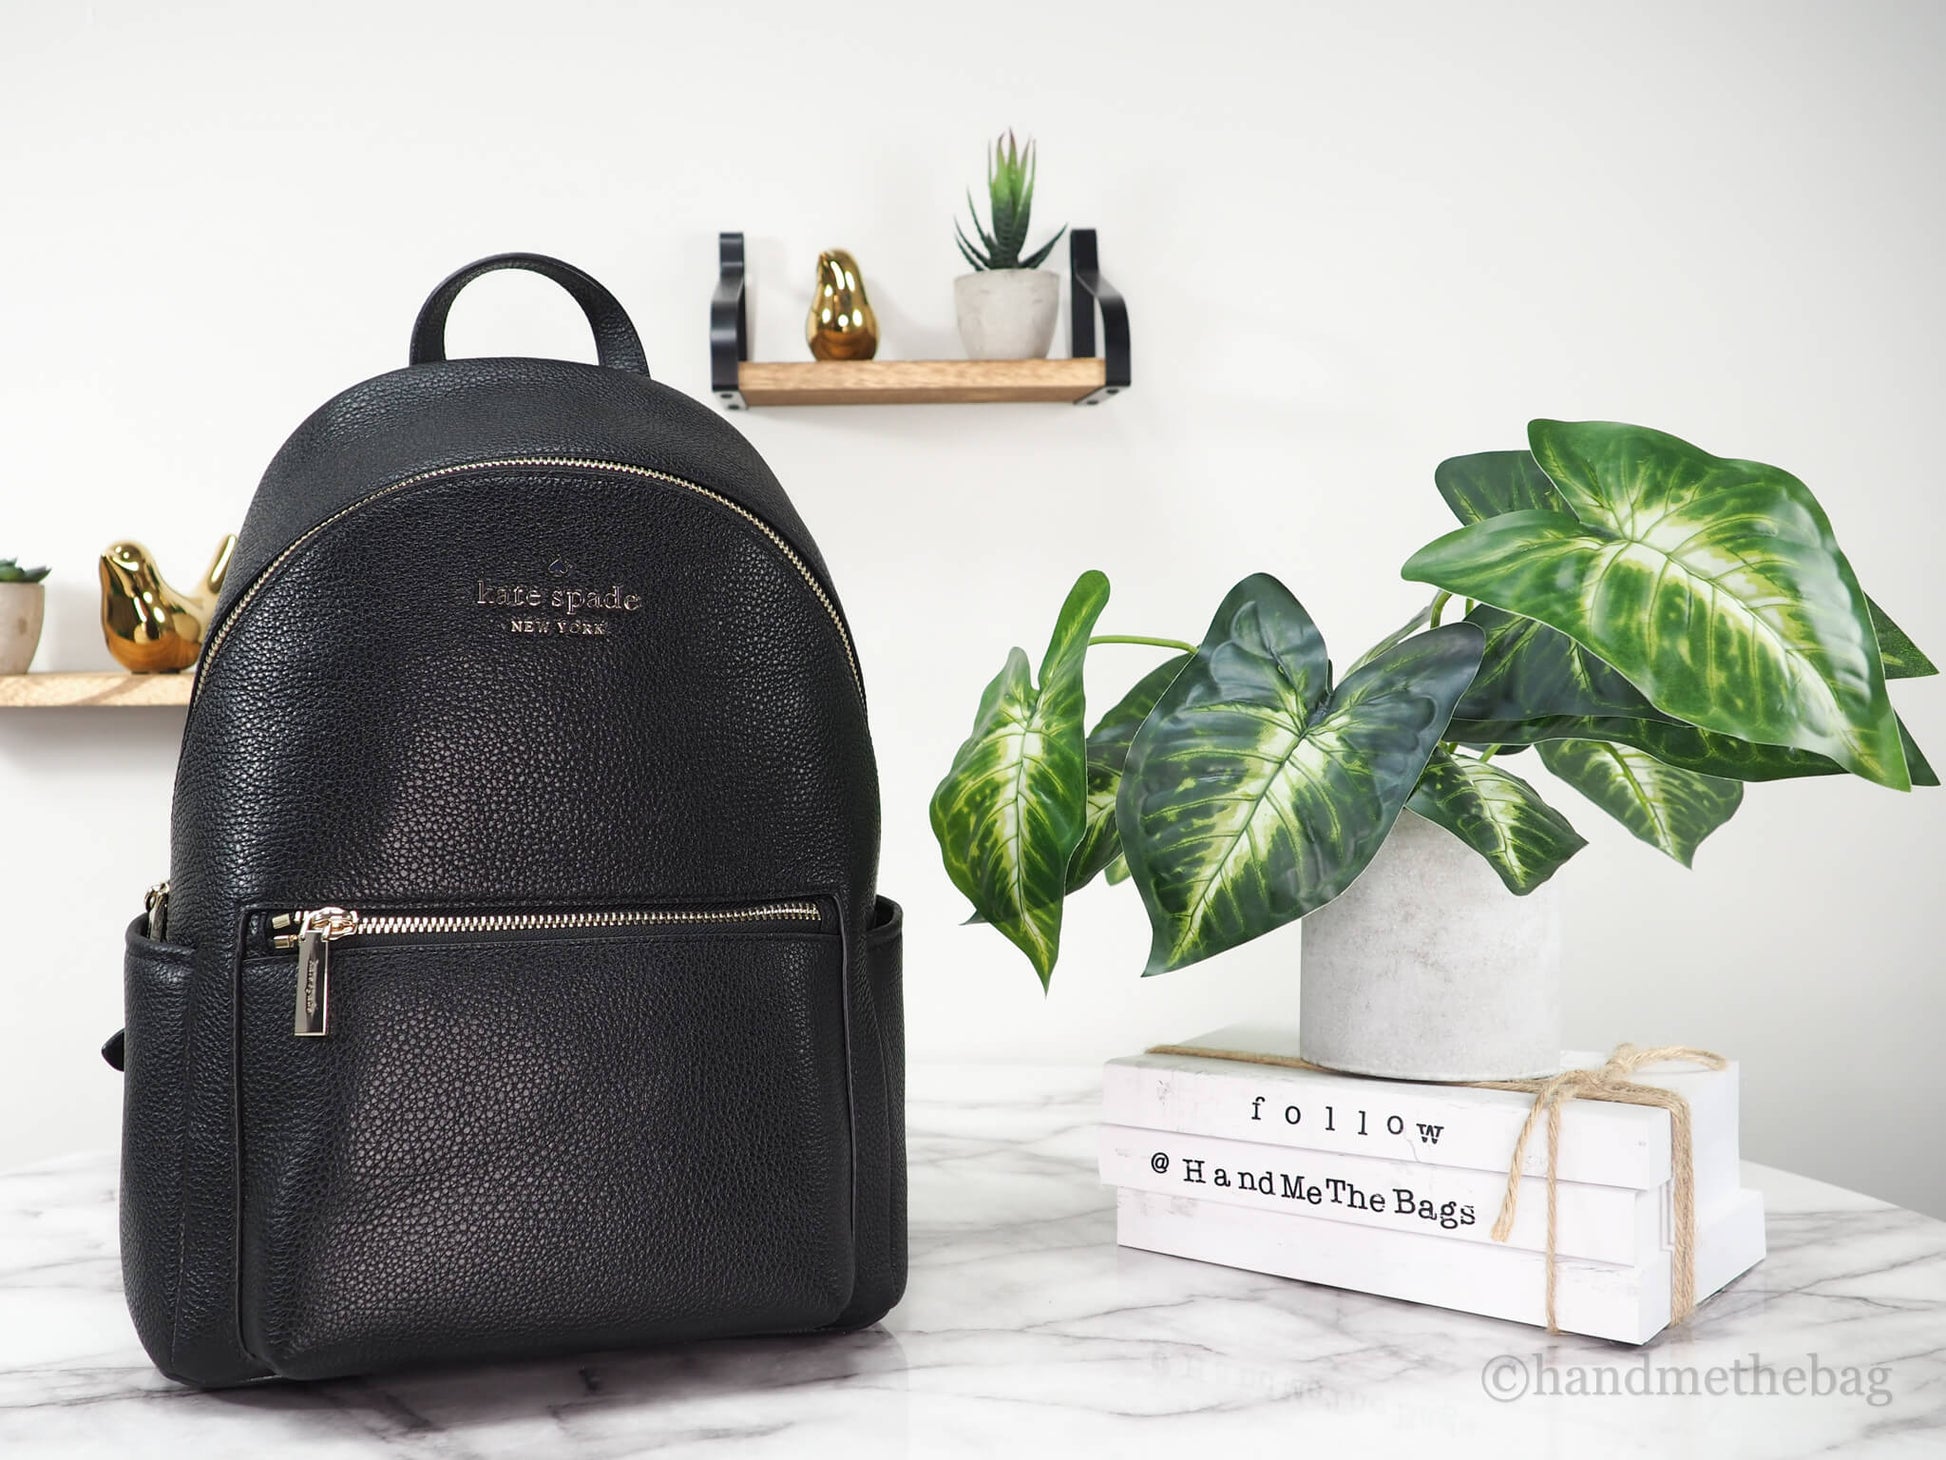 Kate Spade leila black dome backpack on marble table